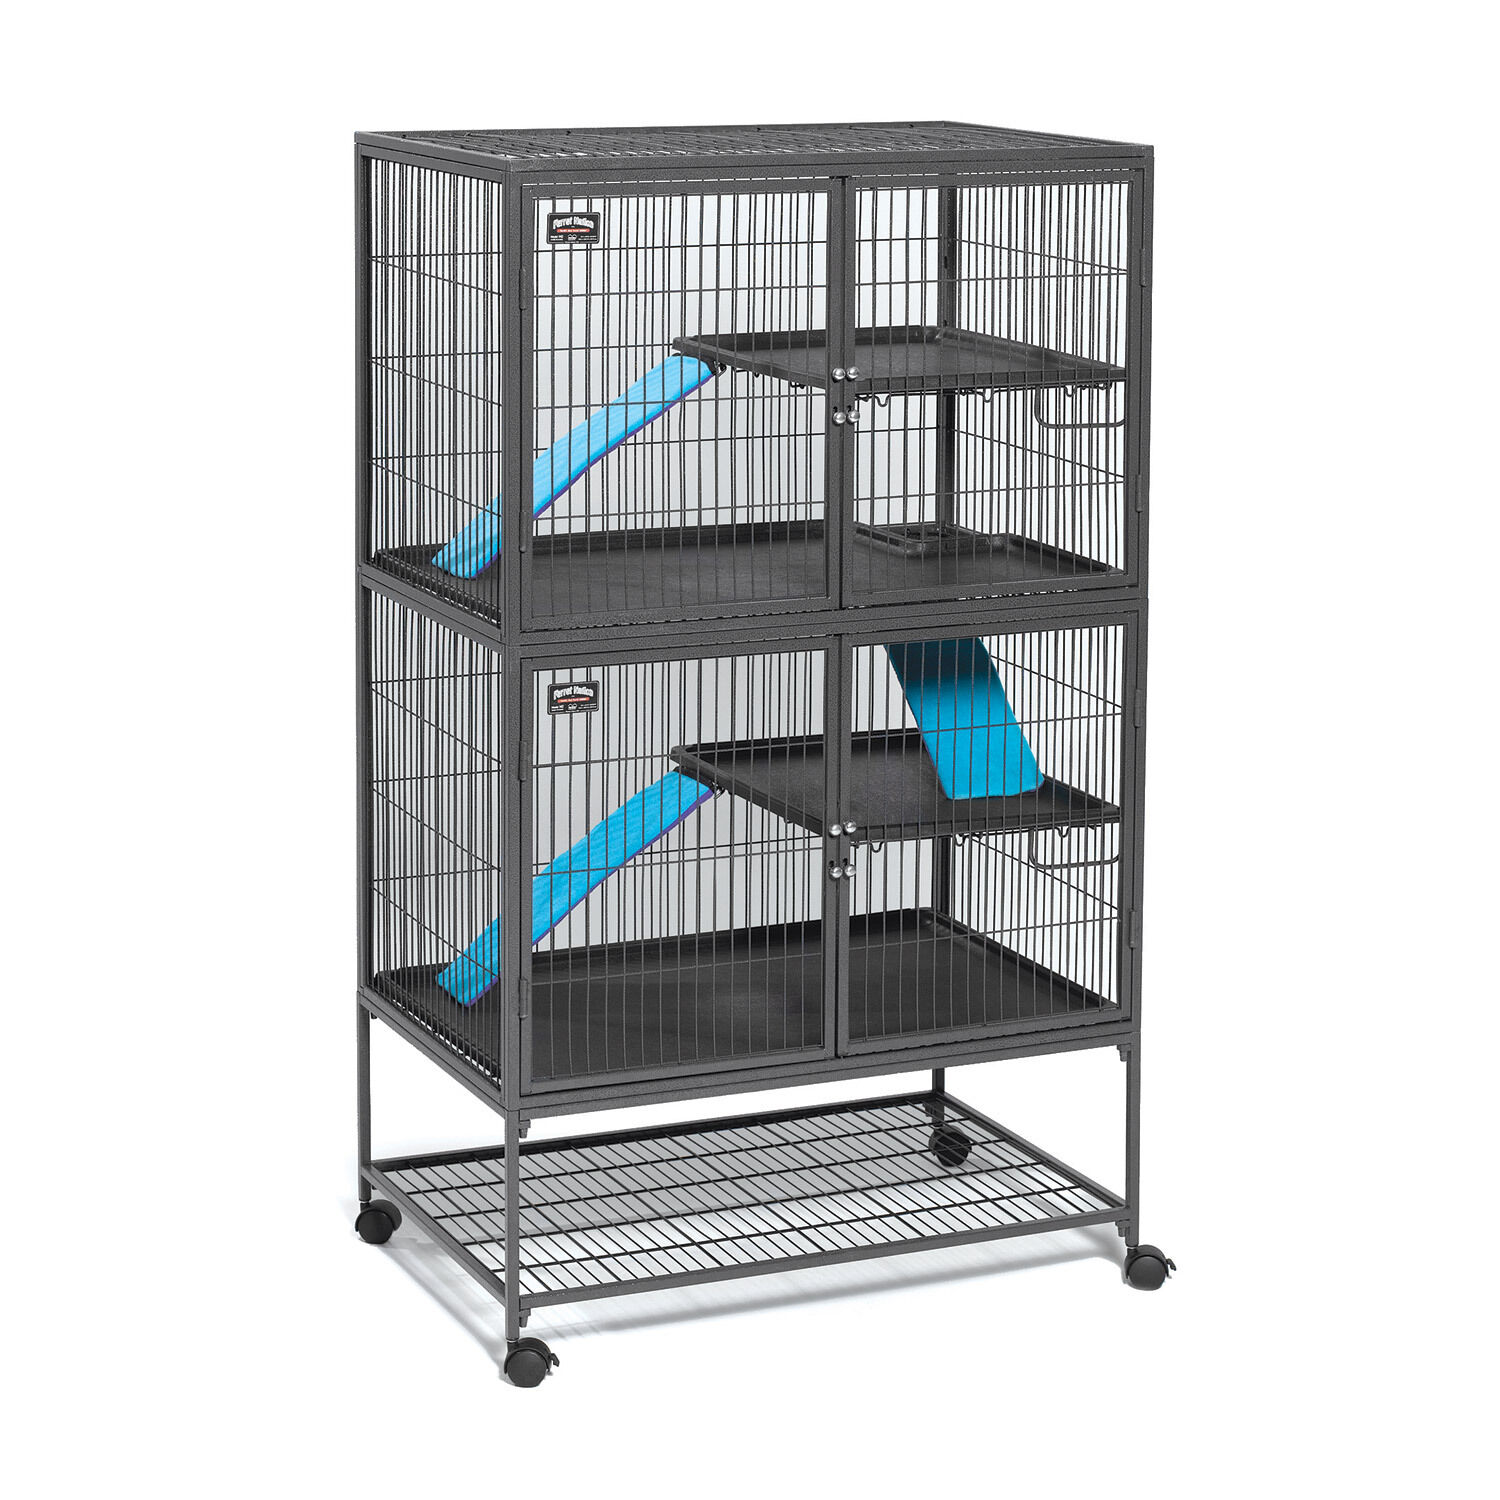 ONLINE ONLY 25% Off Ferret Nation - Double Unit W/Stand Small Animal Habitat